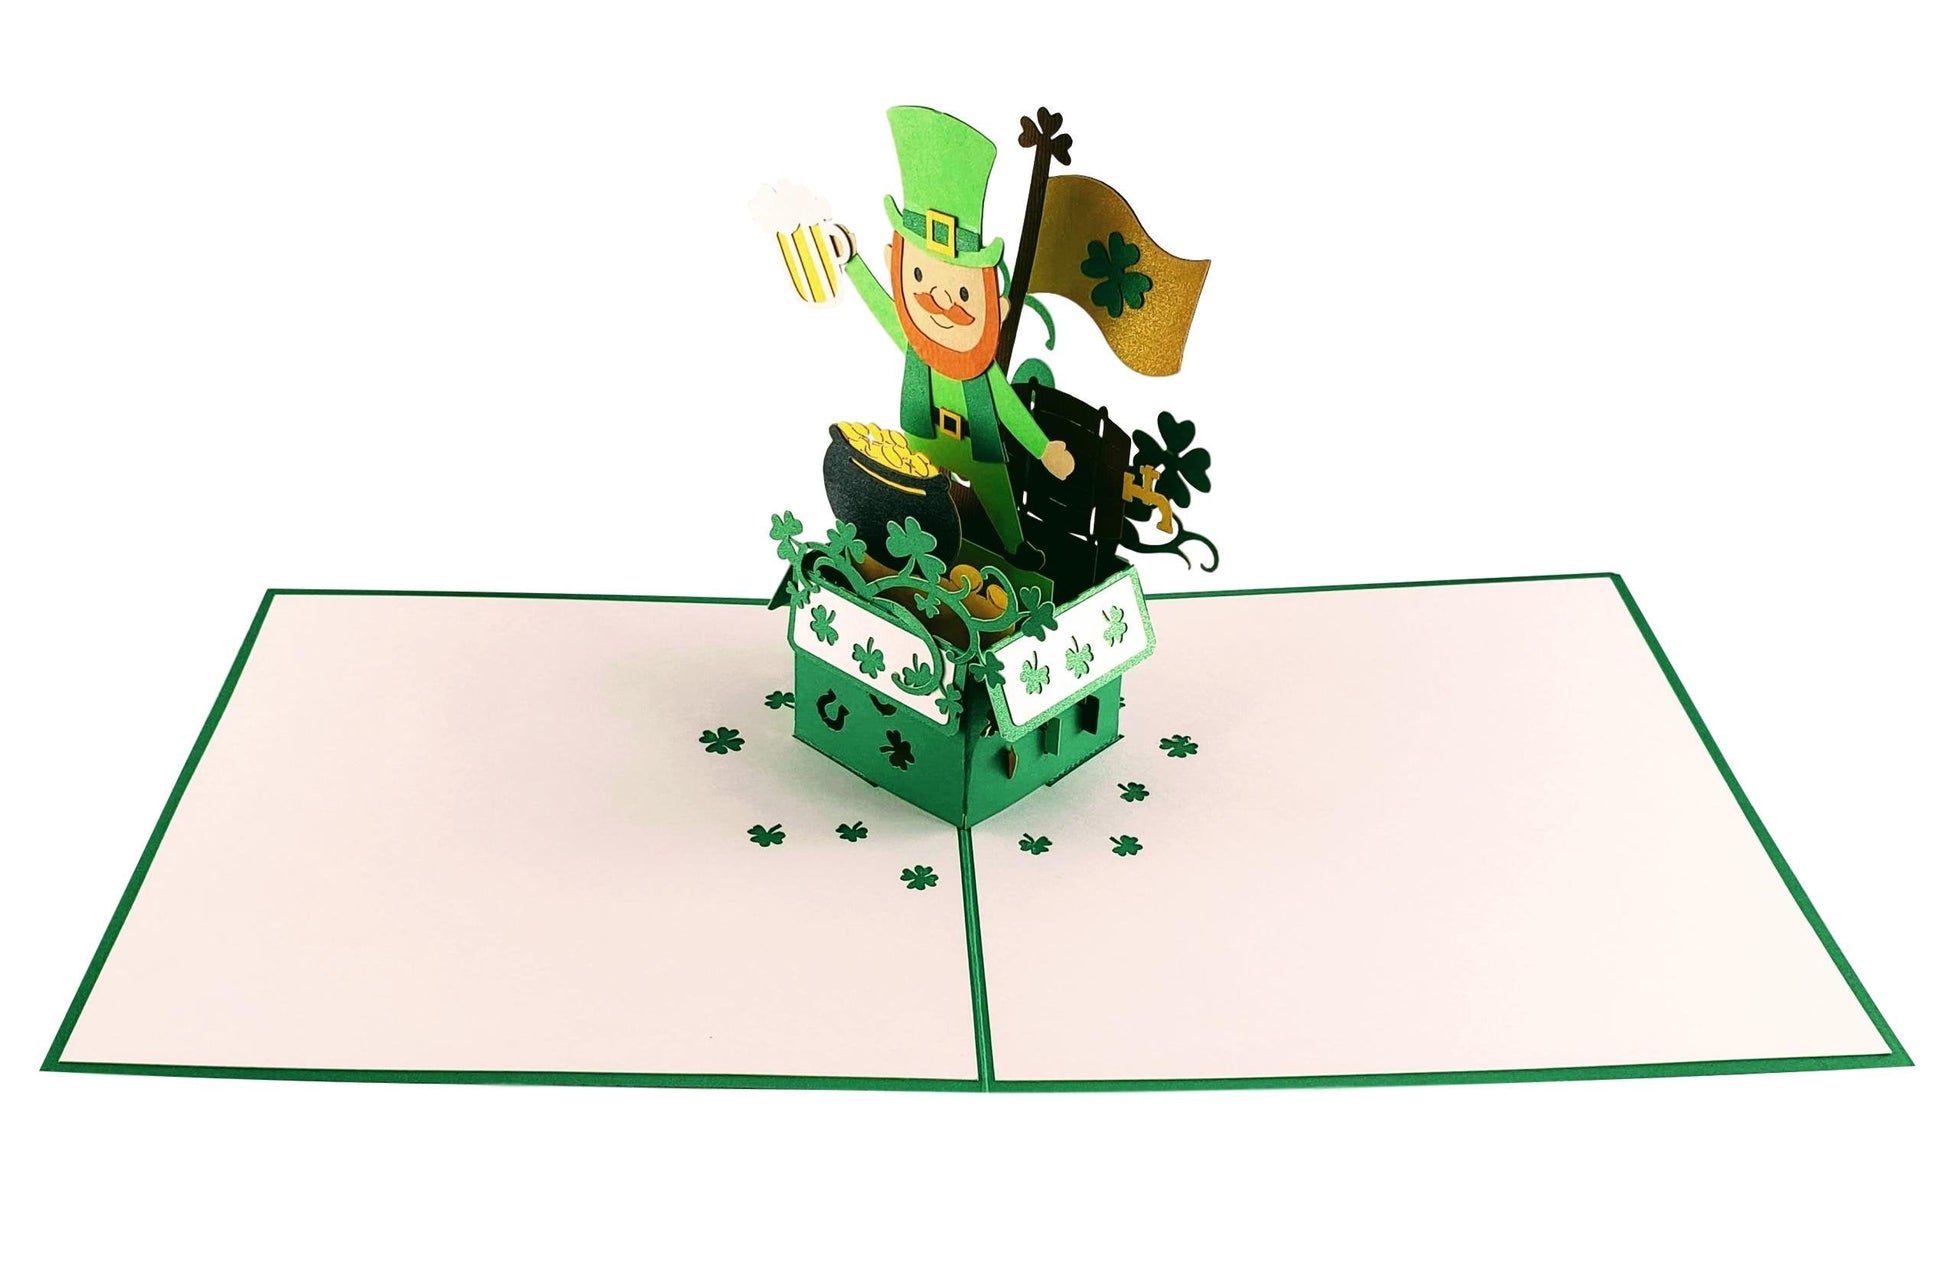 St. Patrick's Day Lucky Leprechaun 3D Pop Up Card - Good Luck - Green - Iconic - St. Patrick's Day - iGifts And Cards